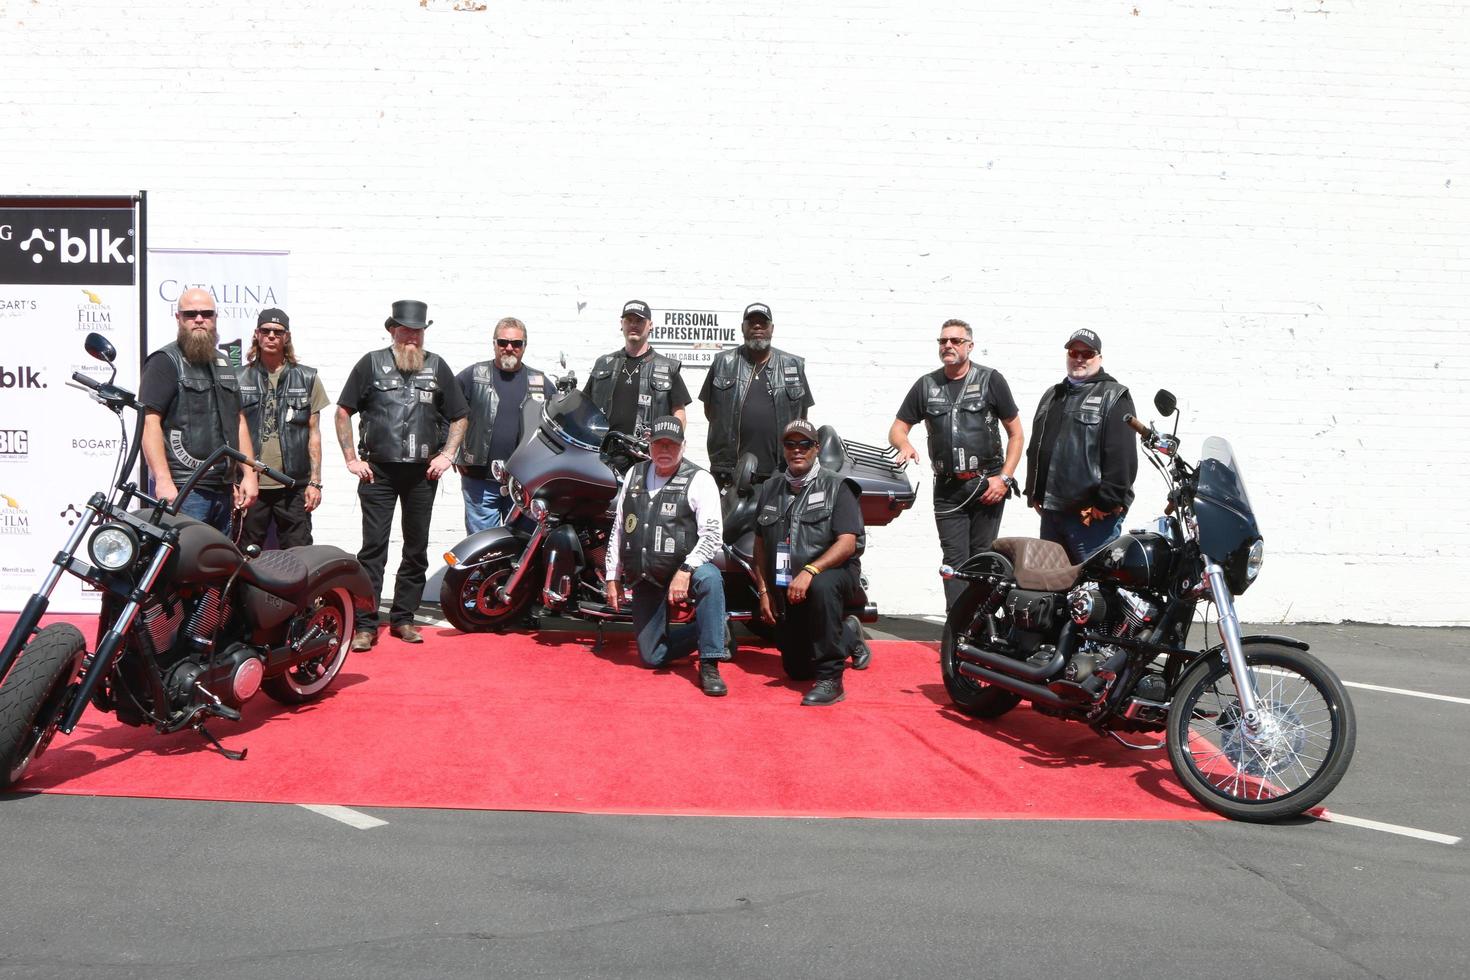 LOS ANGELES  SEP 19 - Ruffins Motorcyle Club Members with their Motocycles at the 2021 Catalina Film Fest at Long Beach, at the Scottish Rite Event Center on September 19, 2021 in Long Beach, CA photo